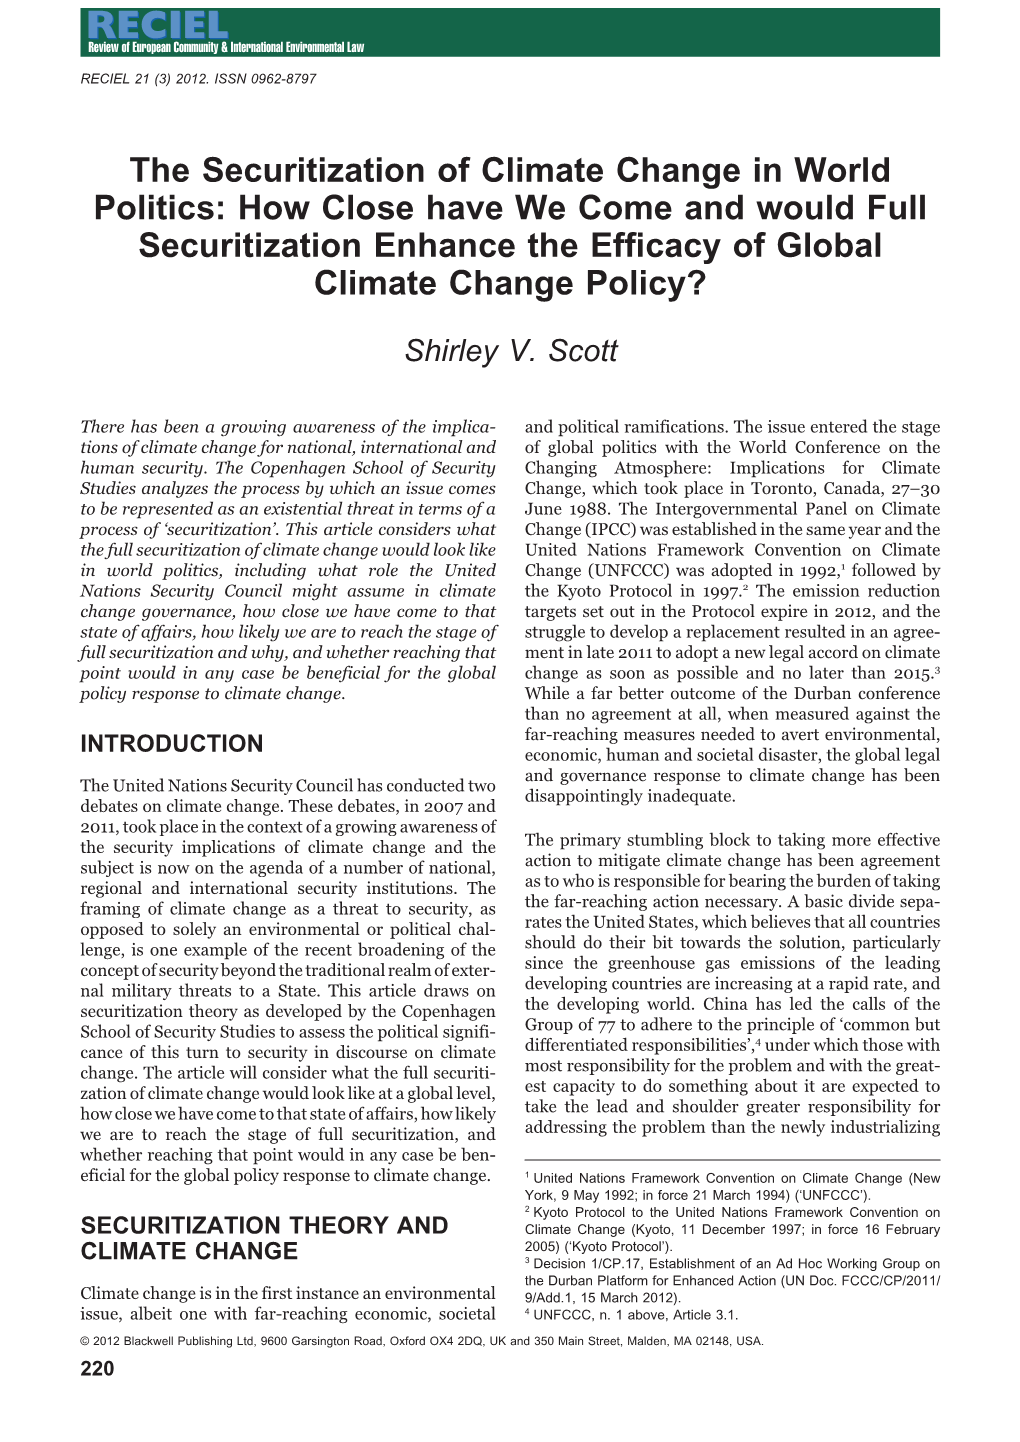 The Securitization of Climate Change in World Politics: How Close Have We Come and Would Full Securitization Enhance the Efﬁcacy of Global Climate Change Policy?